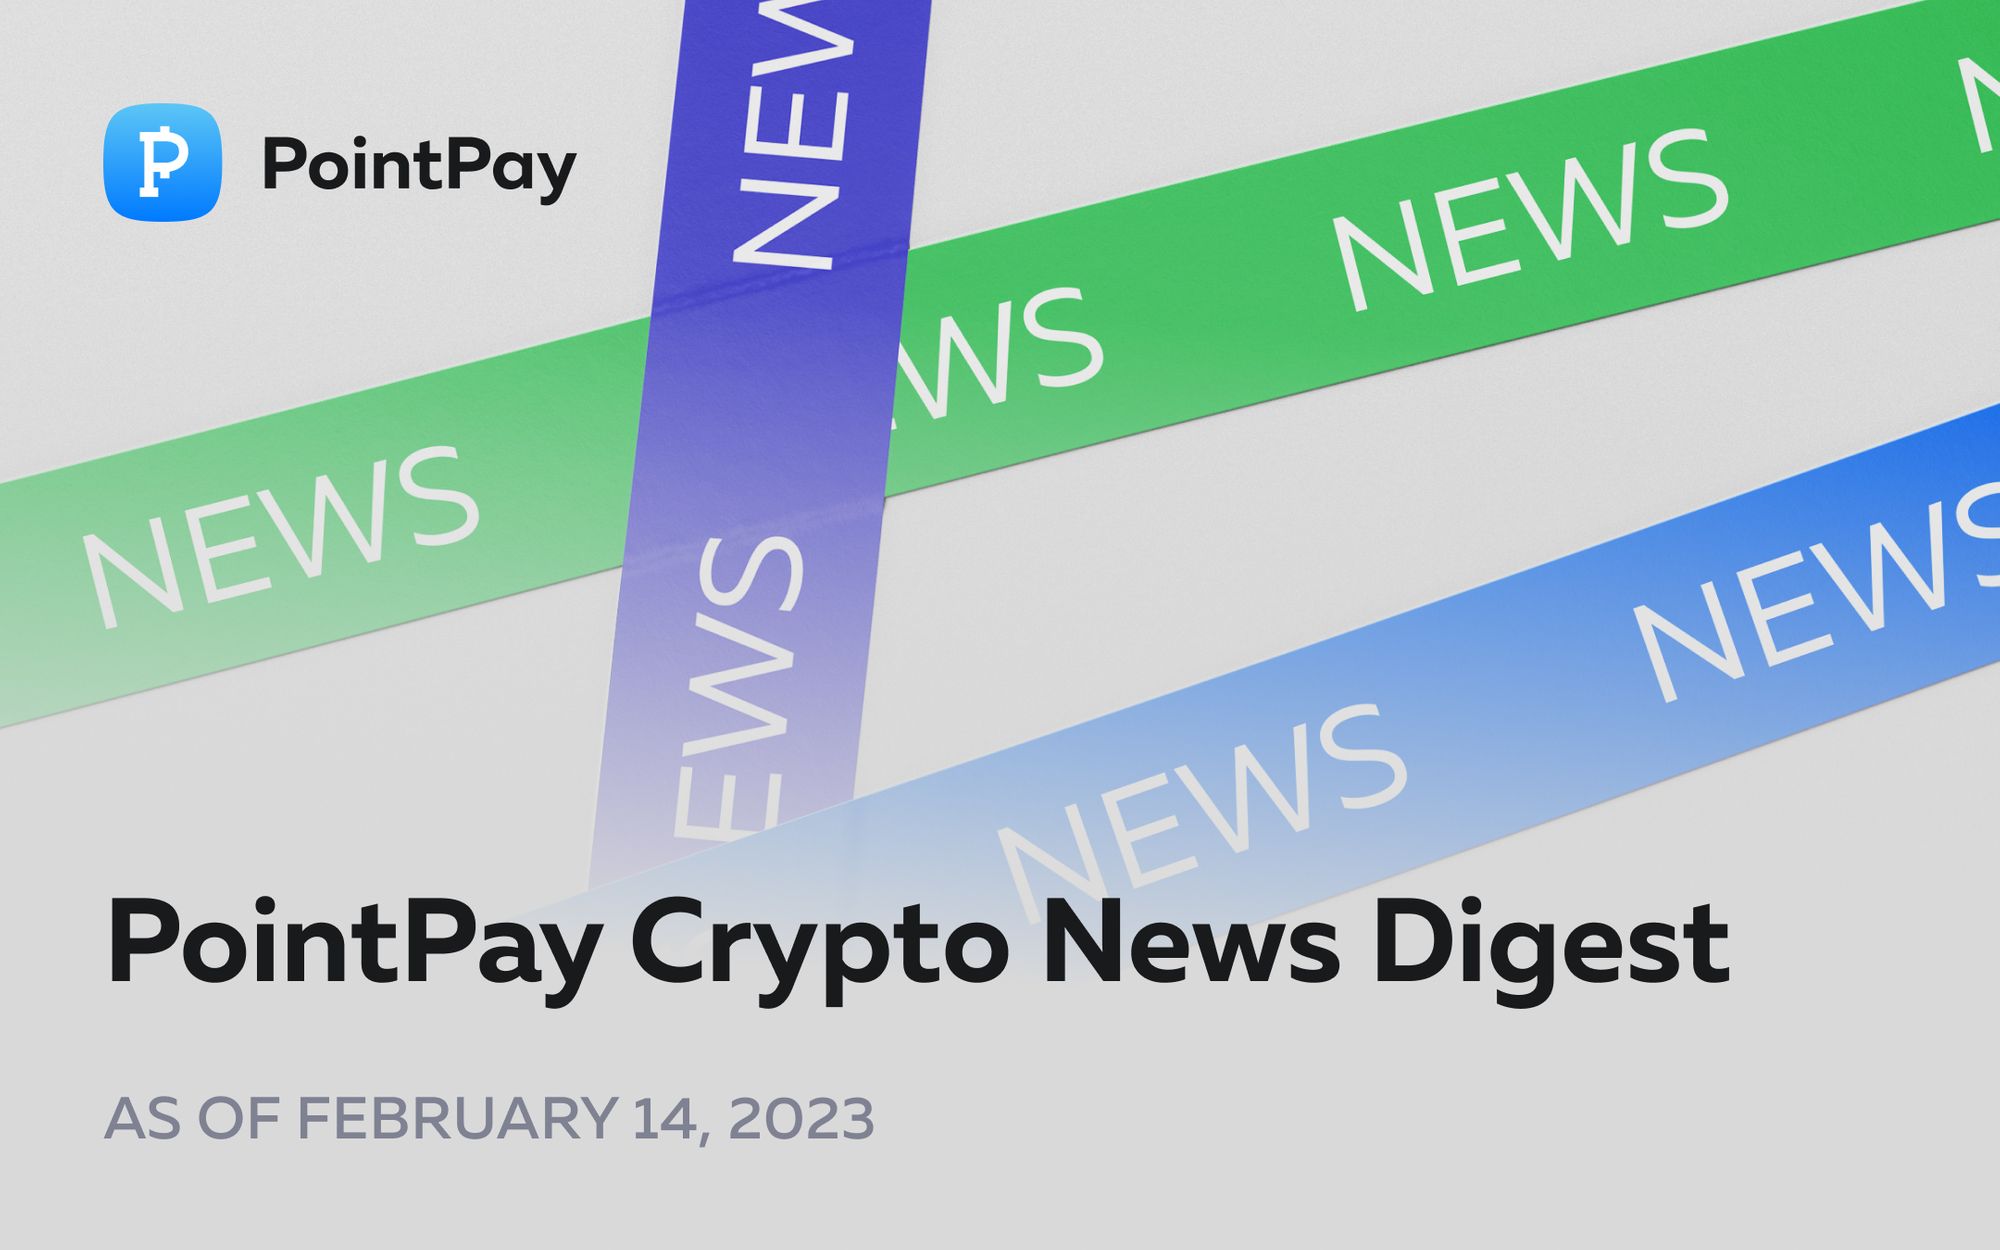 PointPay Crypto Digest